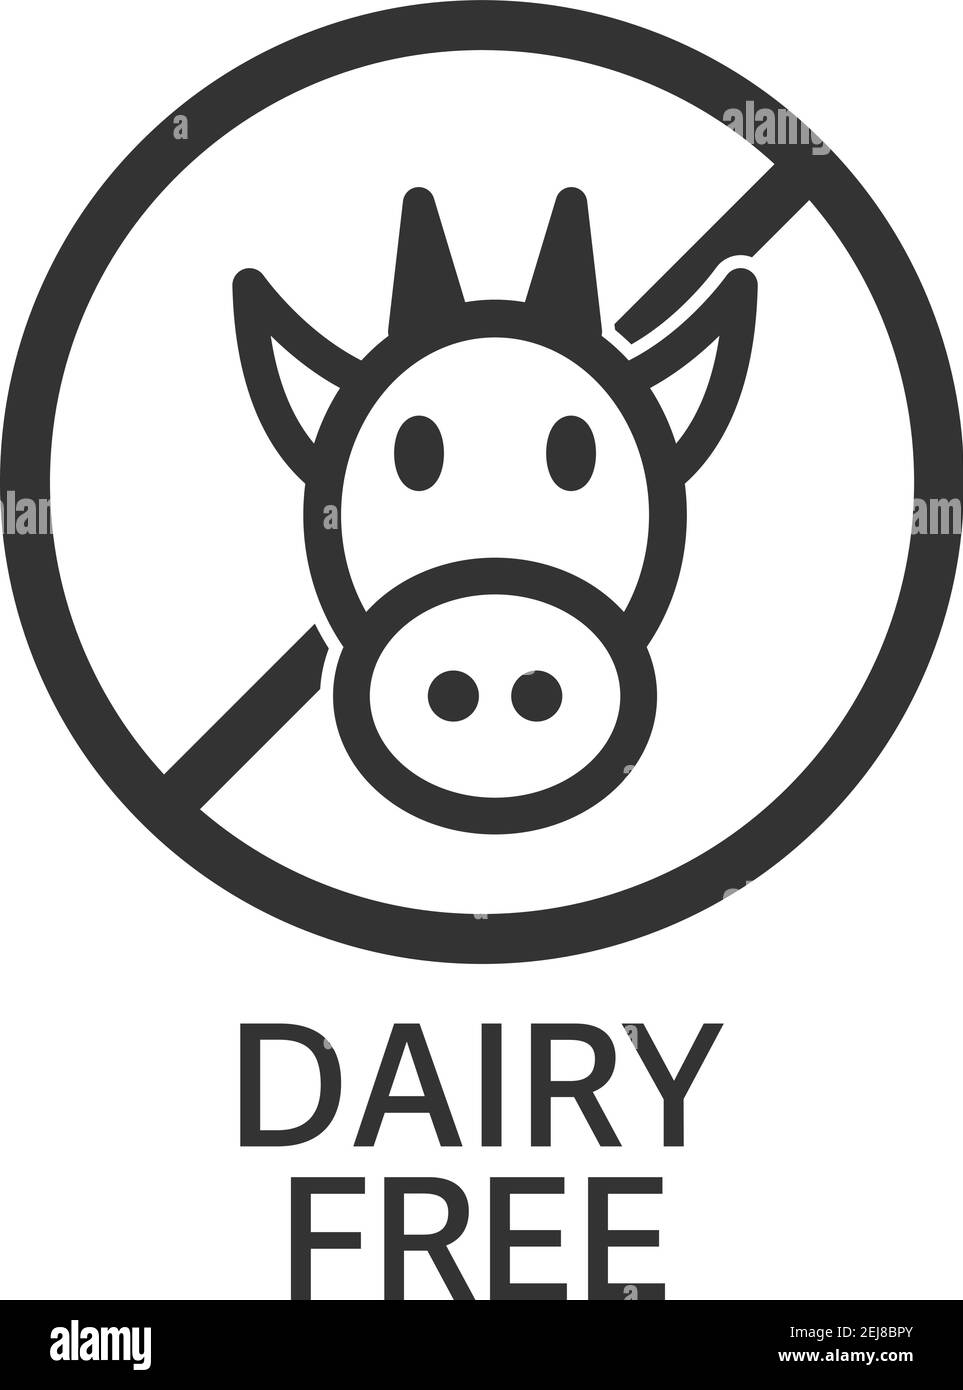 dairy free symbol or label with head of cow vector illustration Stock Vector